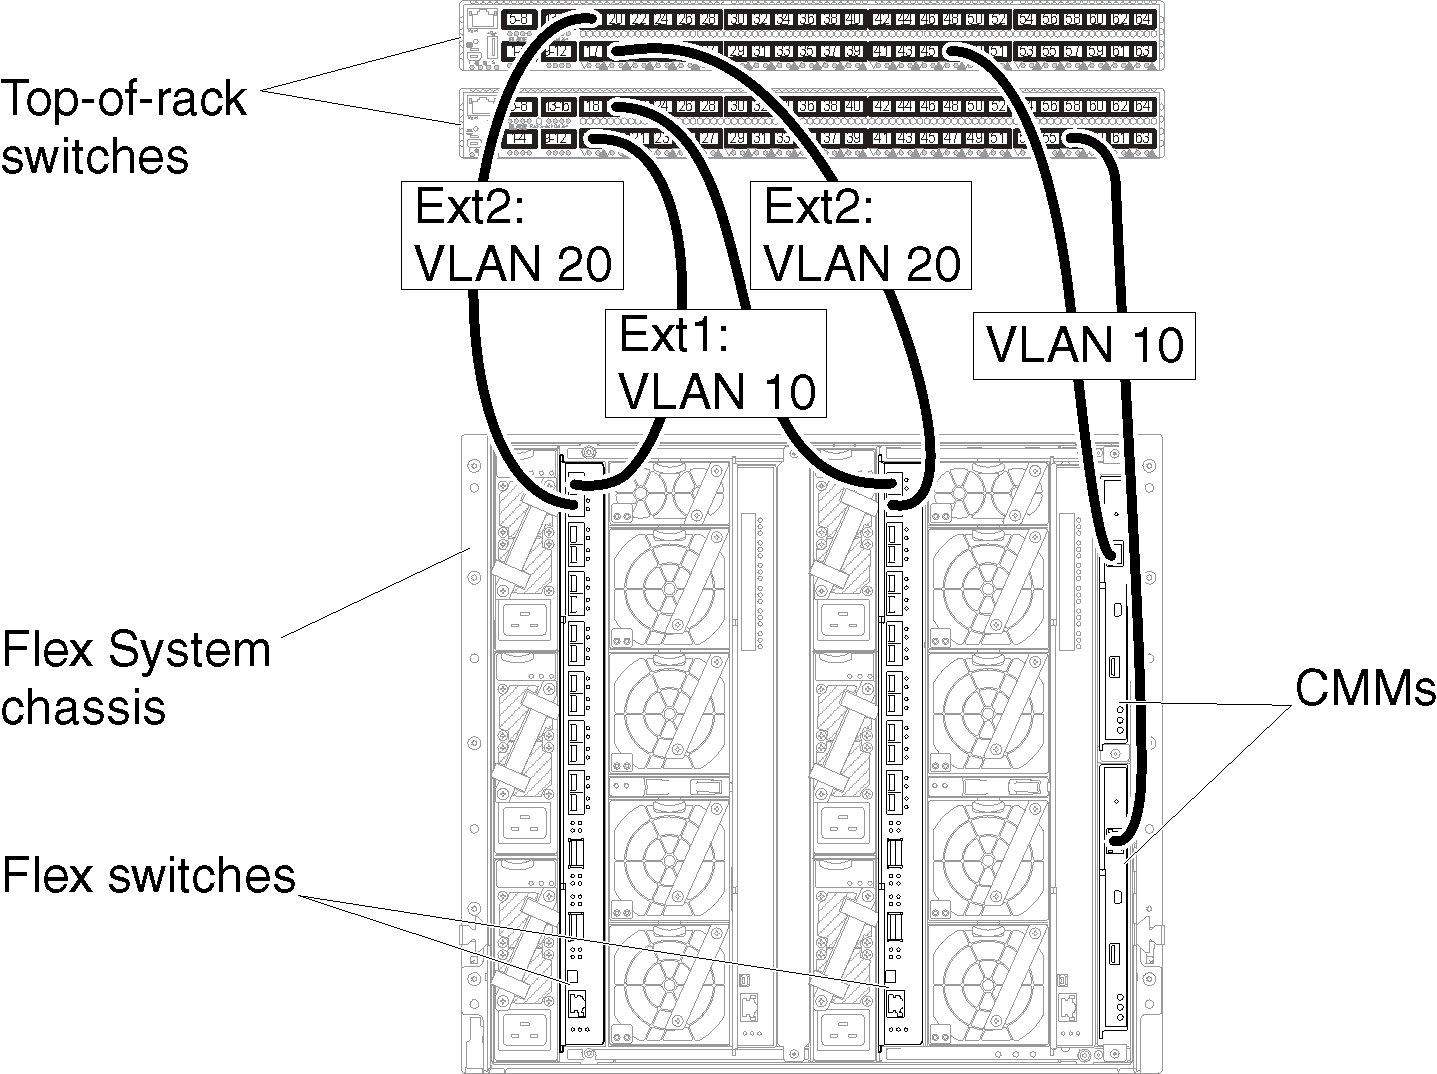 Illustrates configuring VLAN tagging on both management and data networks